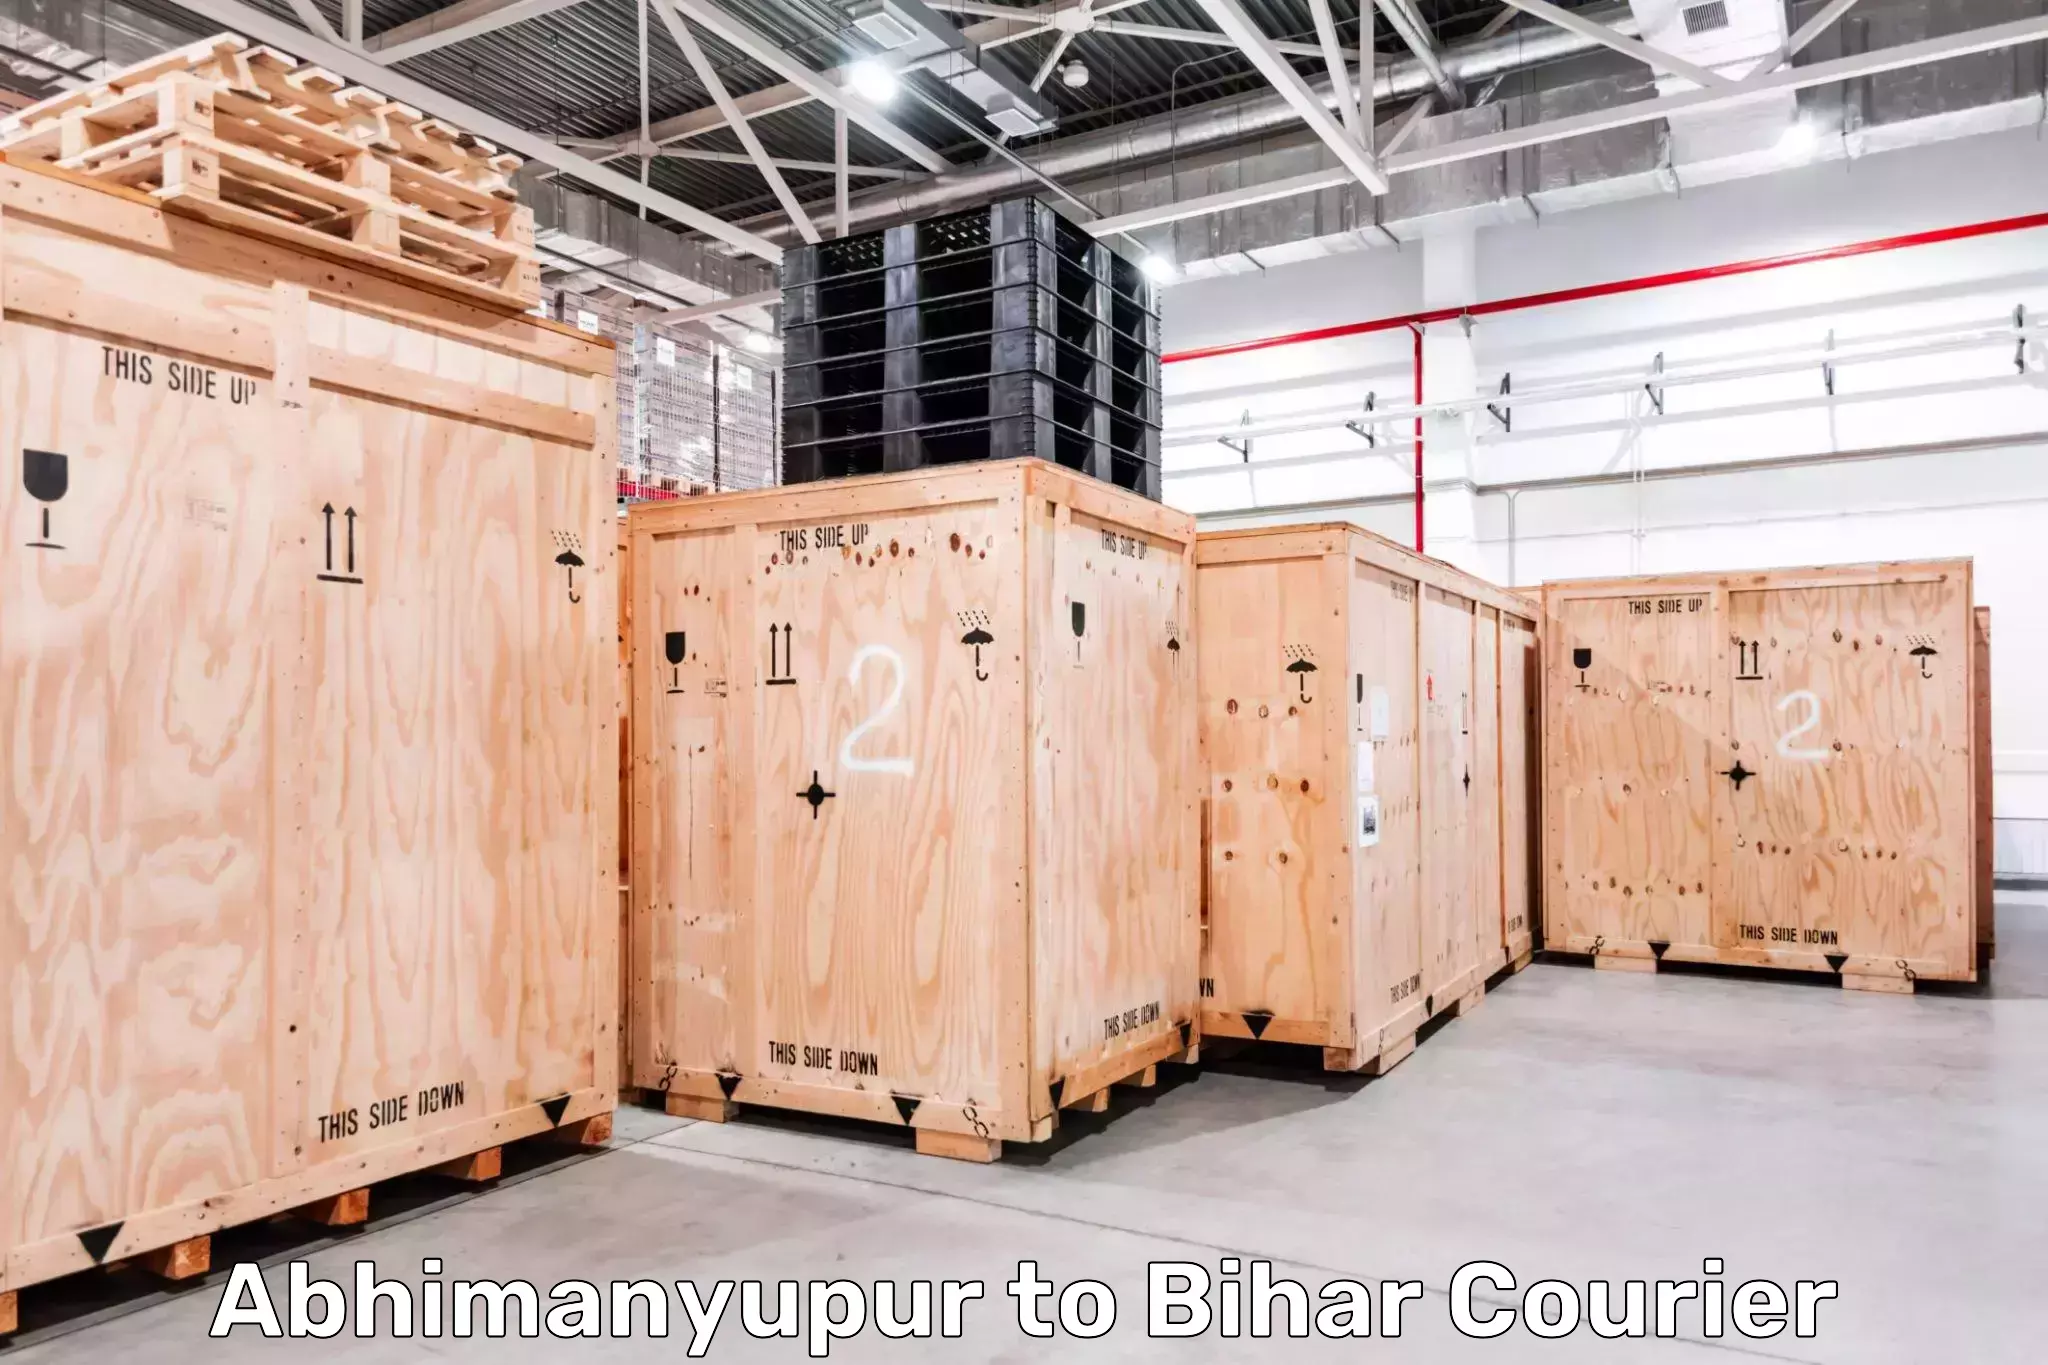 Automated shipping processes in Abhimanyupur to Dhaka